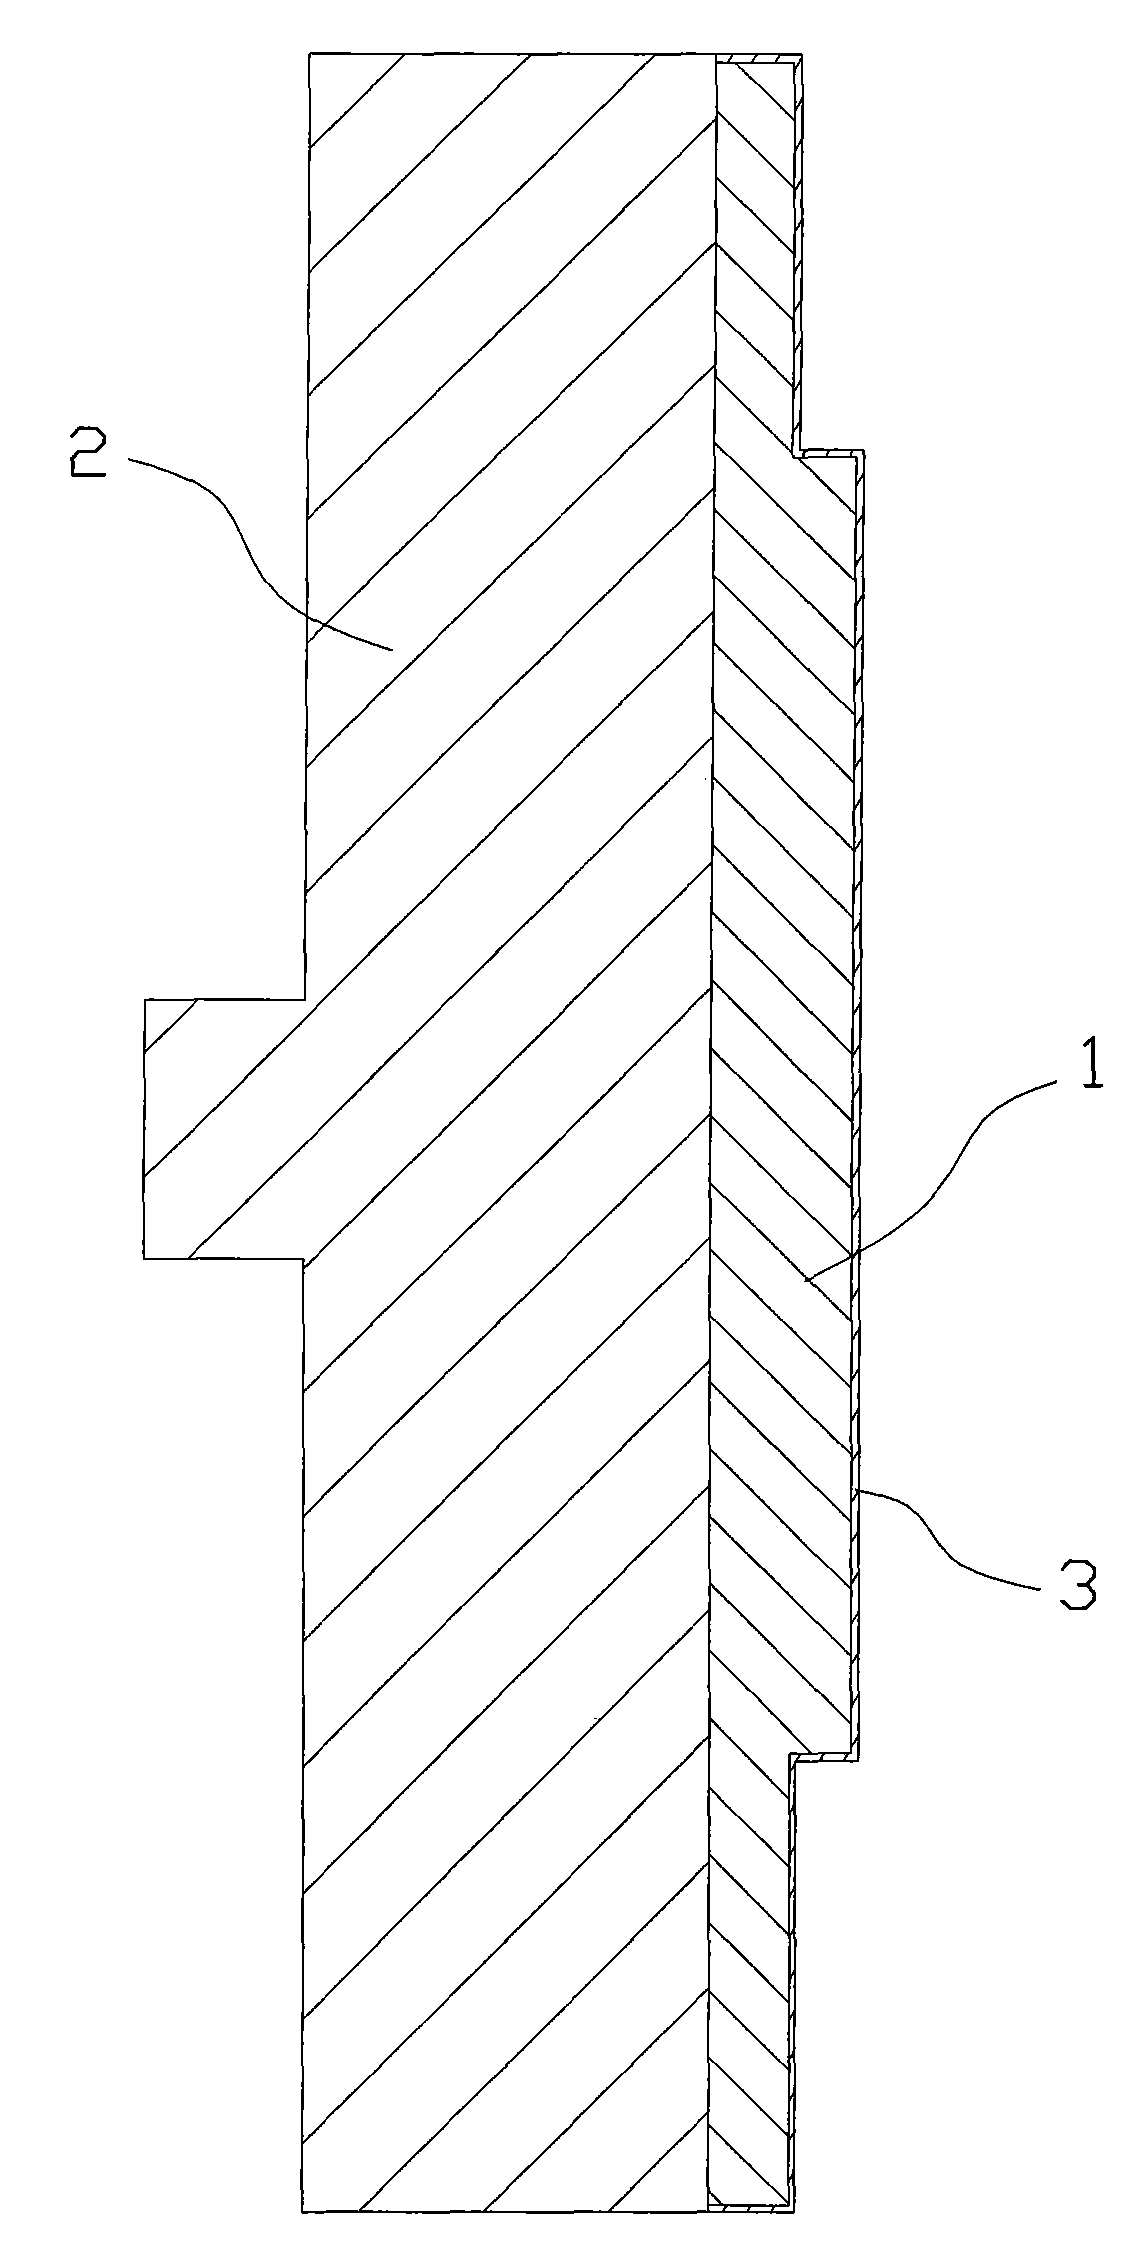 Aluminum alloy and LED lamp substrate applying same